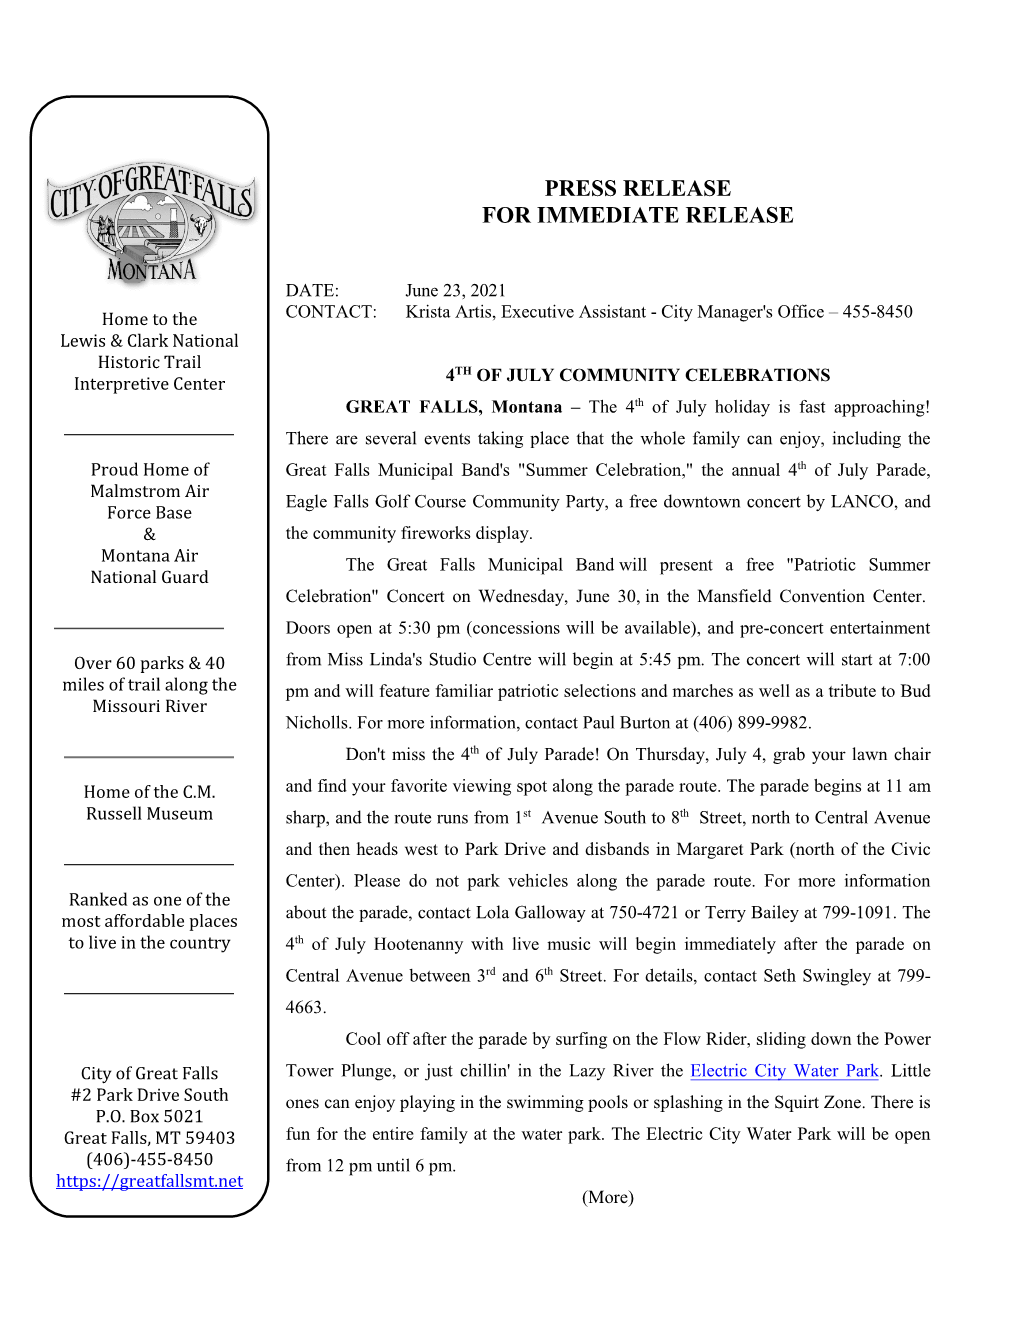 Press Release Template for City of Great Falls